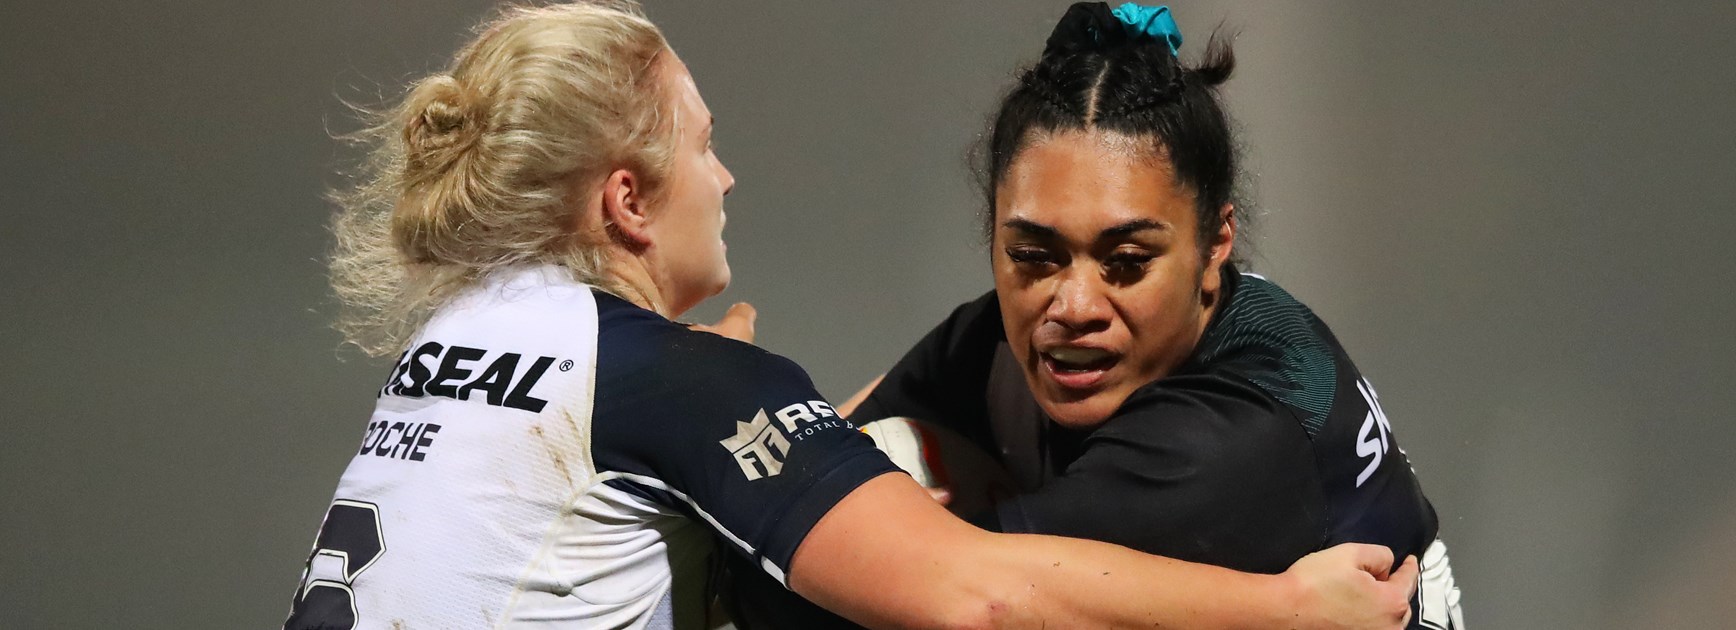 Kiwi Ferns beat England to move into World Cup Final